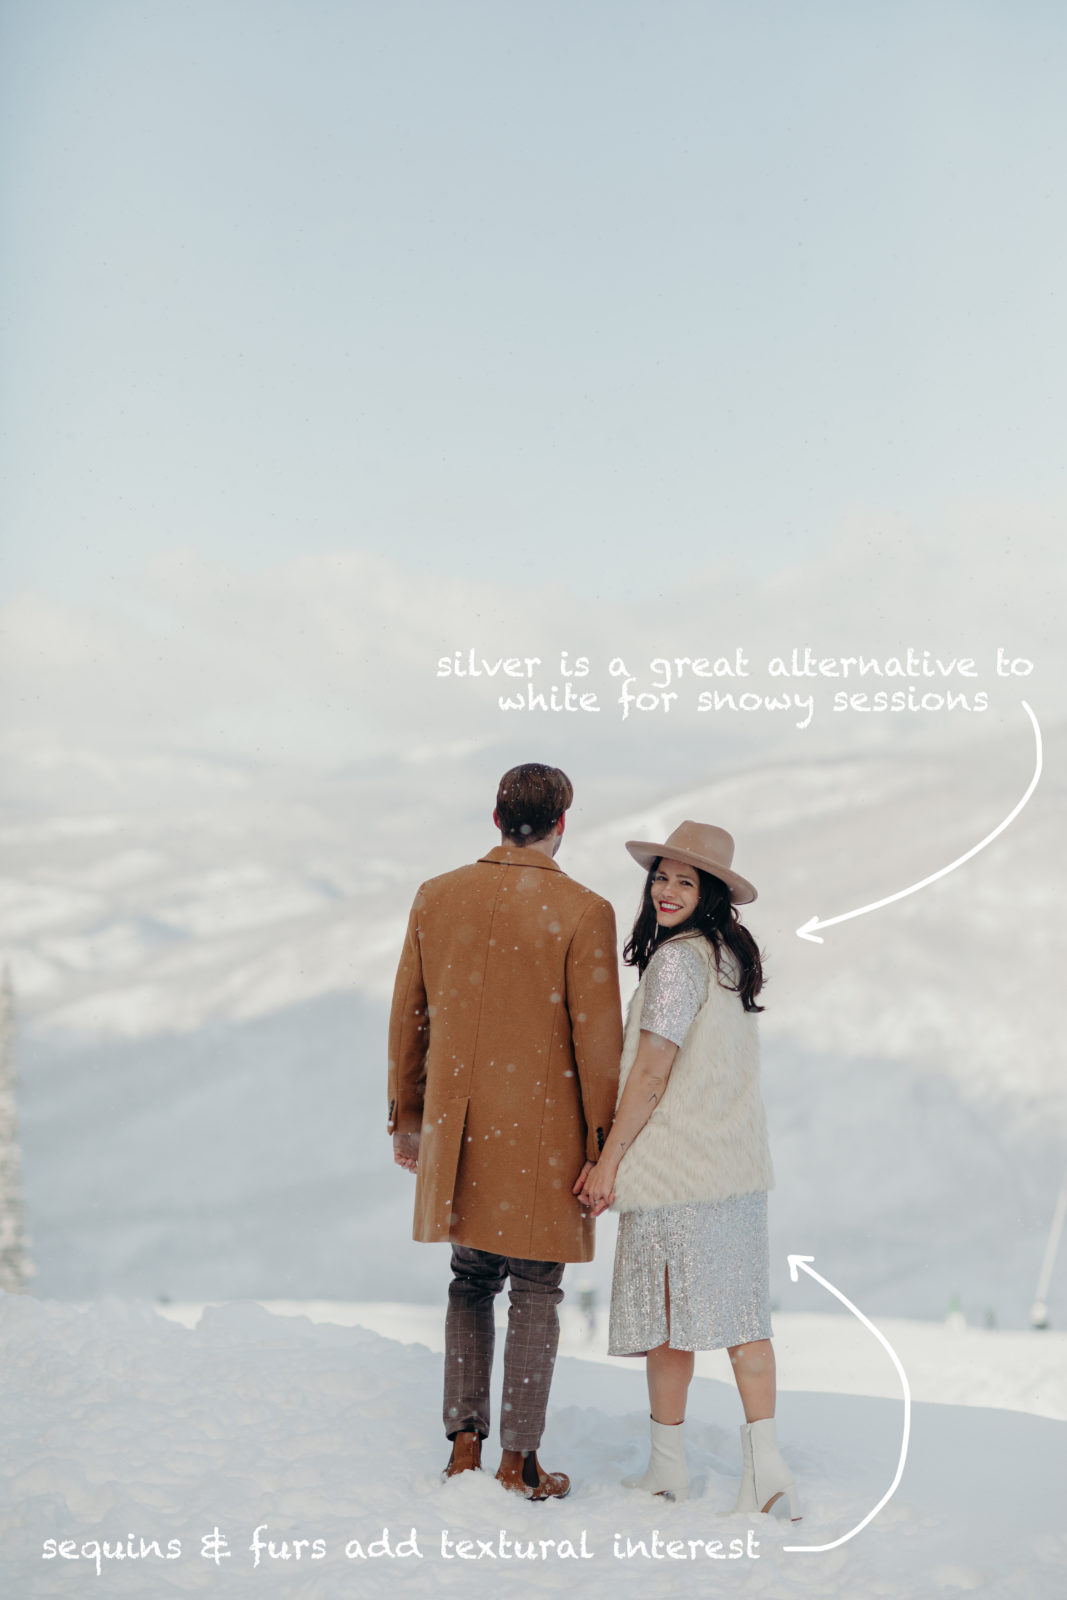 what to wear for engagement photos, engagement photos colorado, colorado engagement photographer, engagement session outfit inspiration, engagement session outfit ideas, outfits for engagement photos, winter outfit ideas, engagement session winter